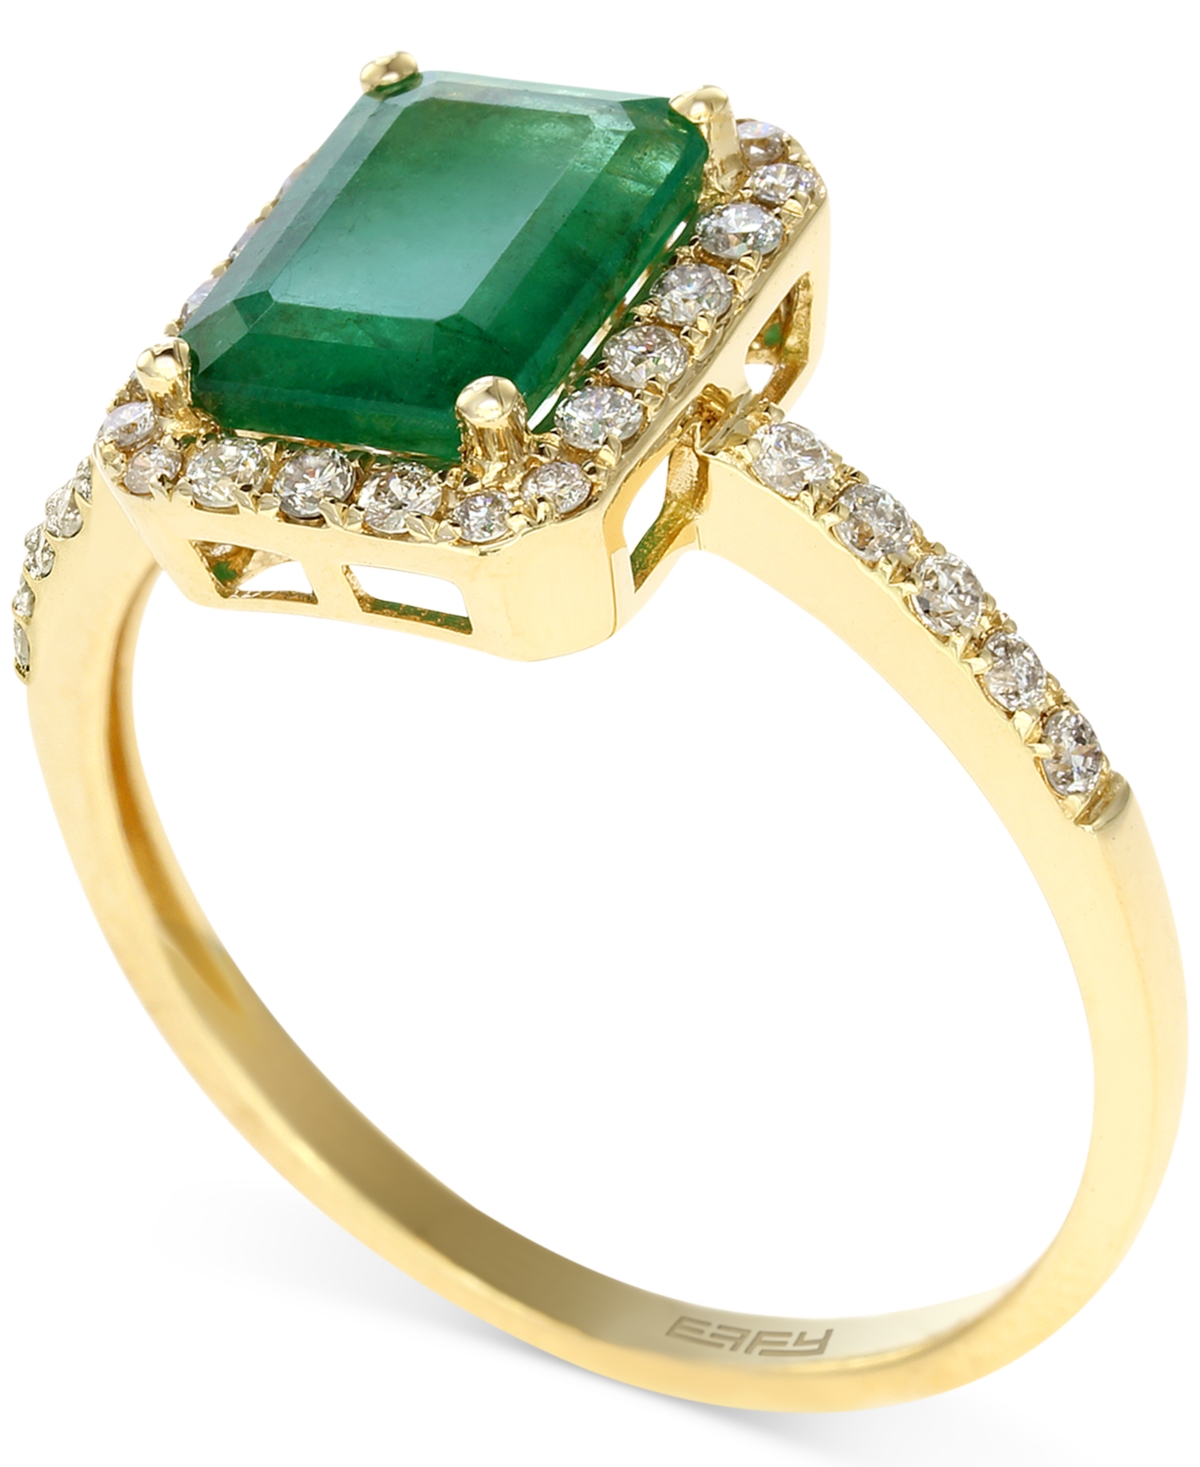 Brasilica by Effy Emerald (1-3/8 ct. t.w.) and Diamond (1/4 ct. t.w.) Ring in 14k Gold, Created for Macy's - Green